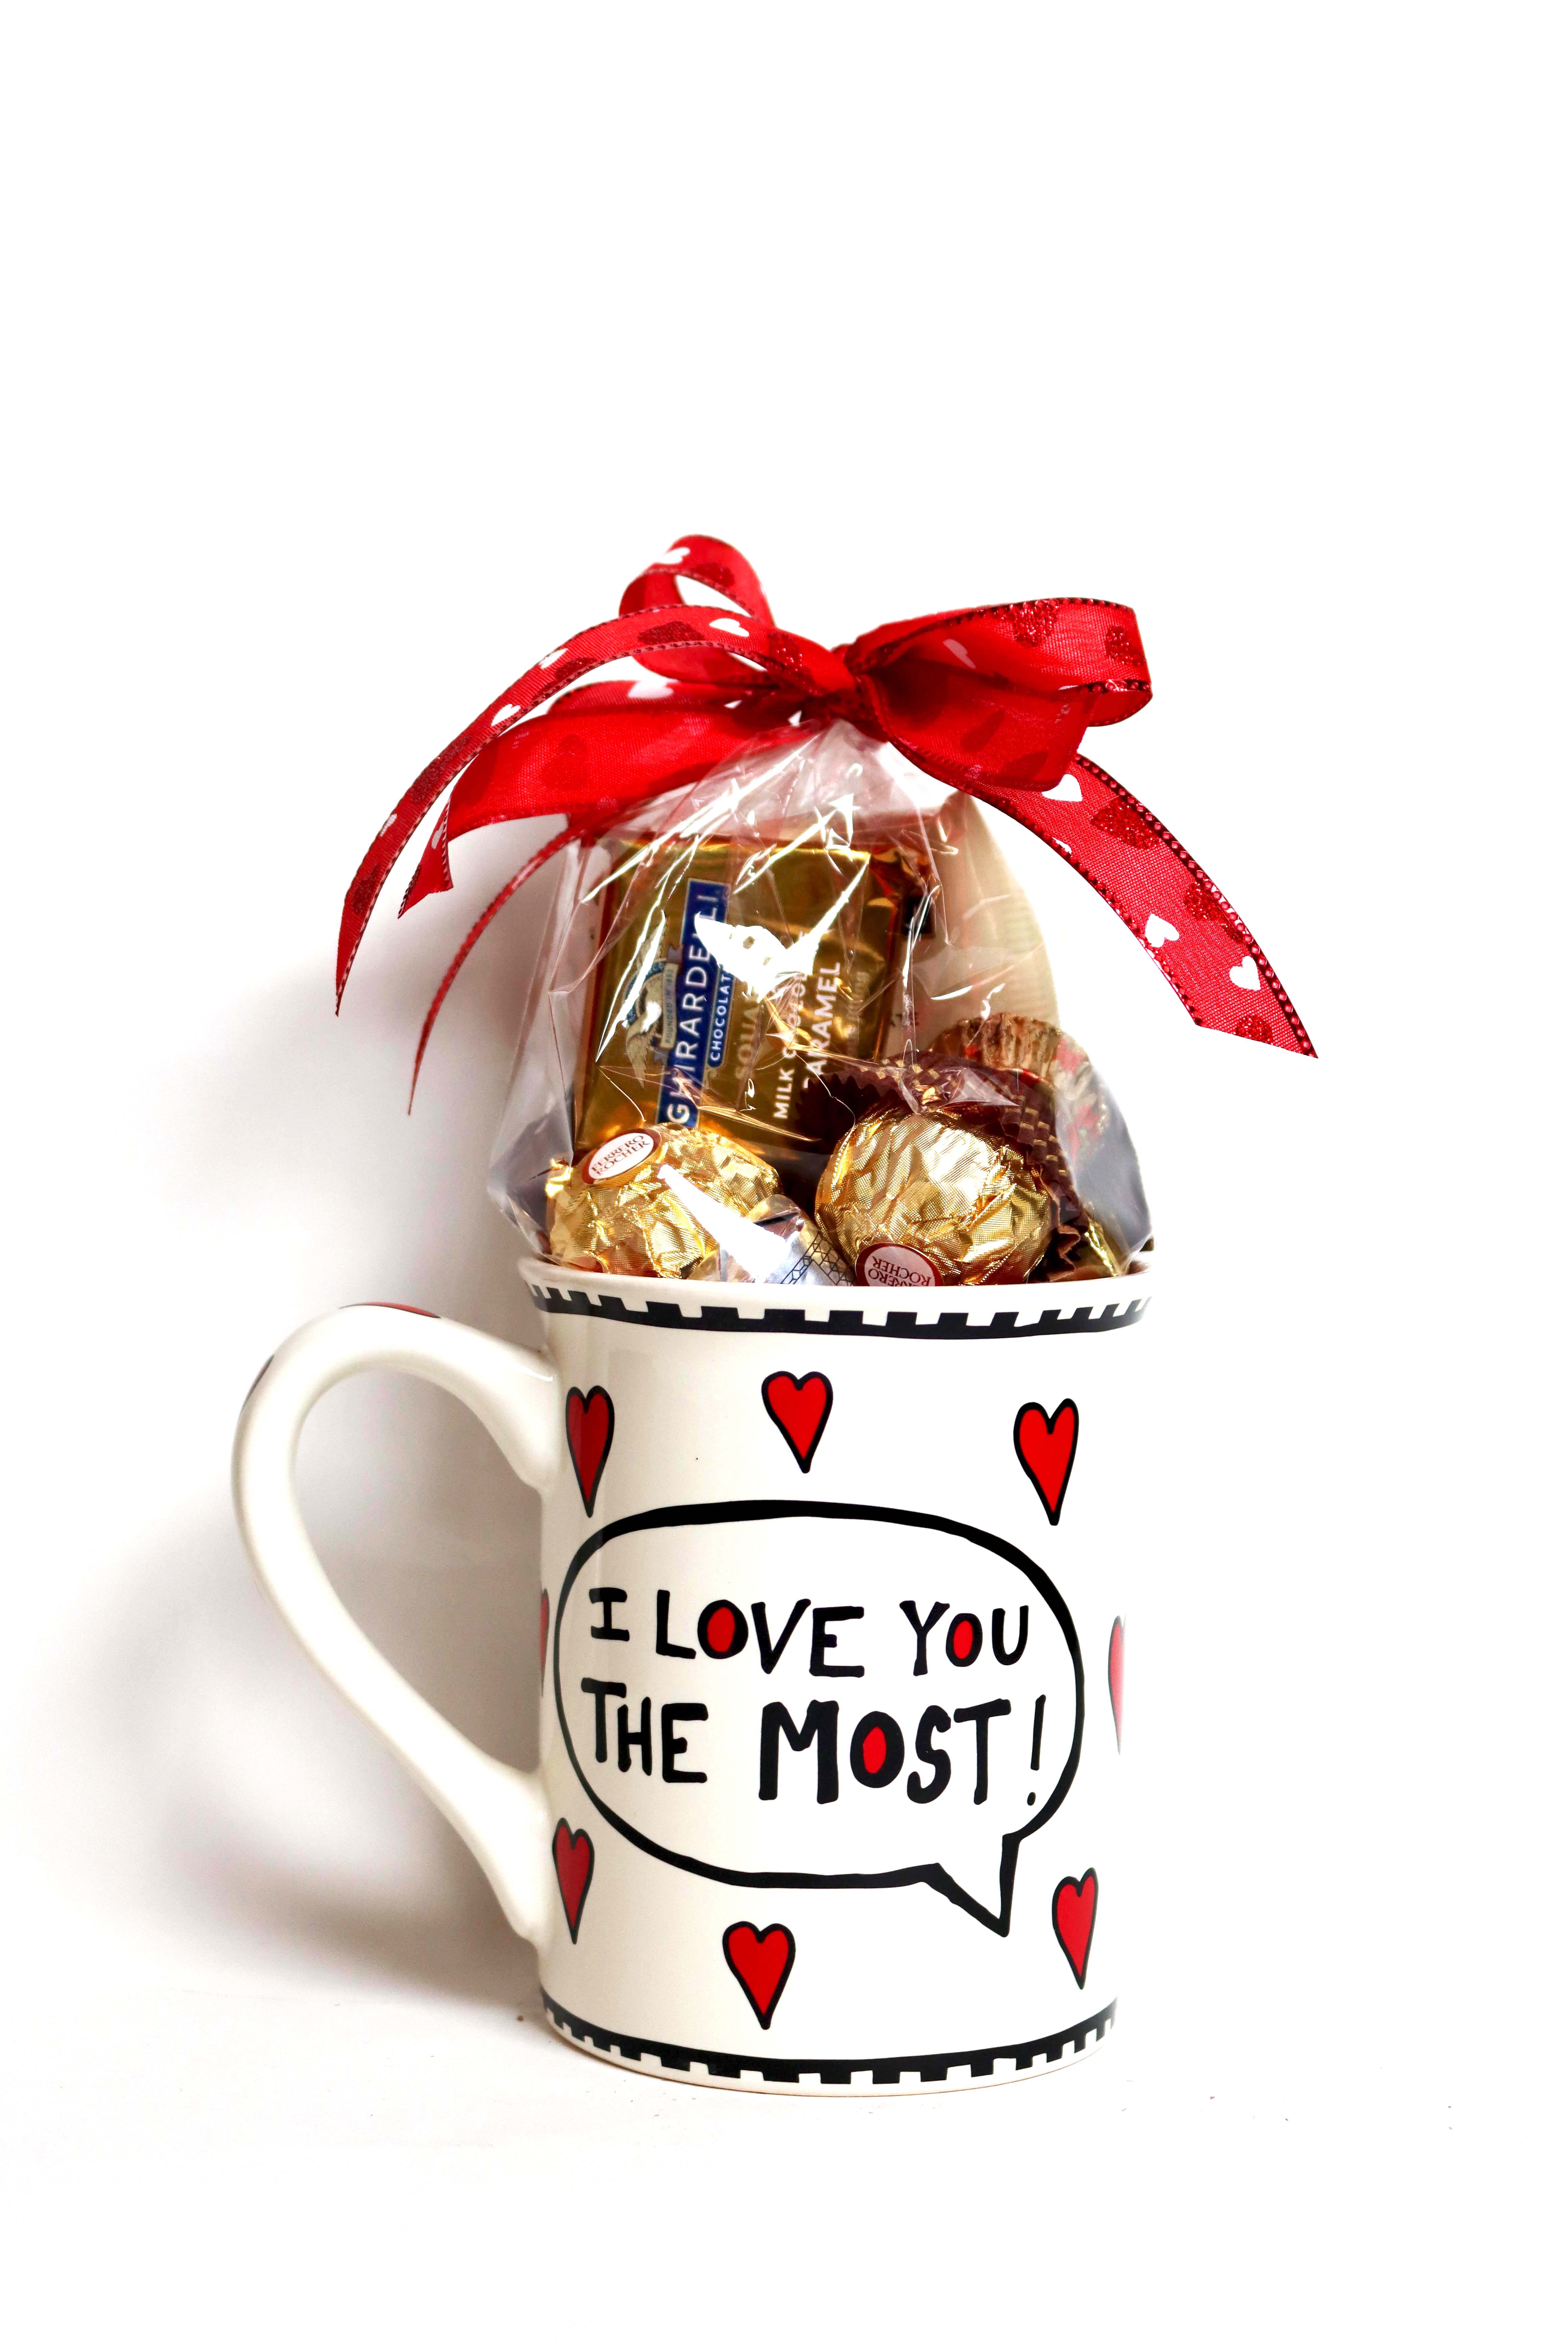 I Love You The Most - The assorted chocolate selection inside a trendy mug with text bubbles and a heart design makes this the perfect gift for Valentine’s Day or an anniversary. This 16 oz., high-quality stoneware mug is dishwasher and microwave-safe. 